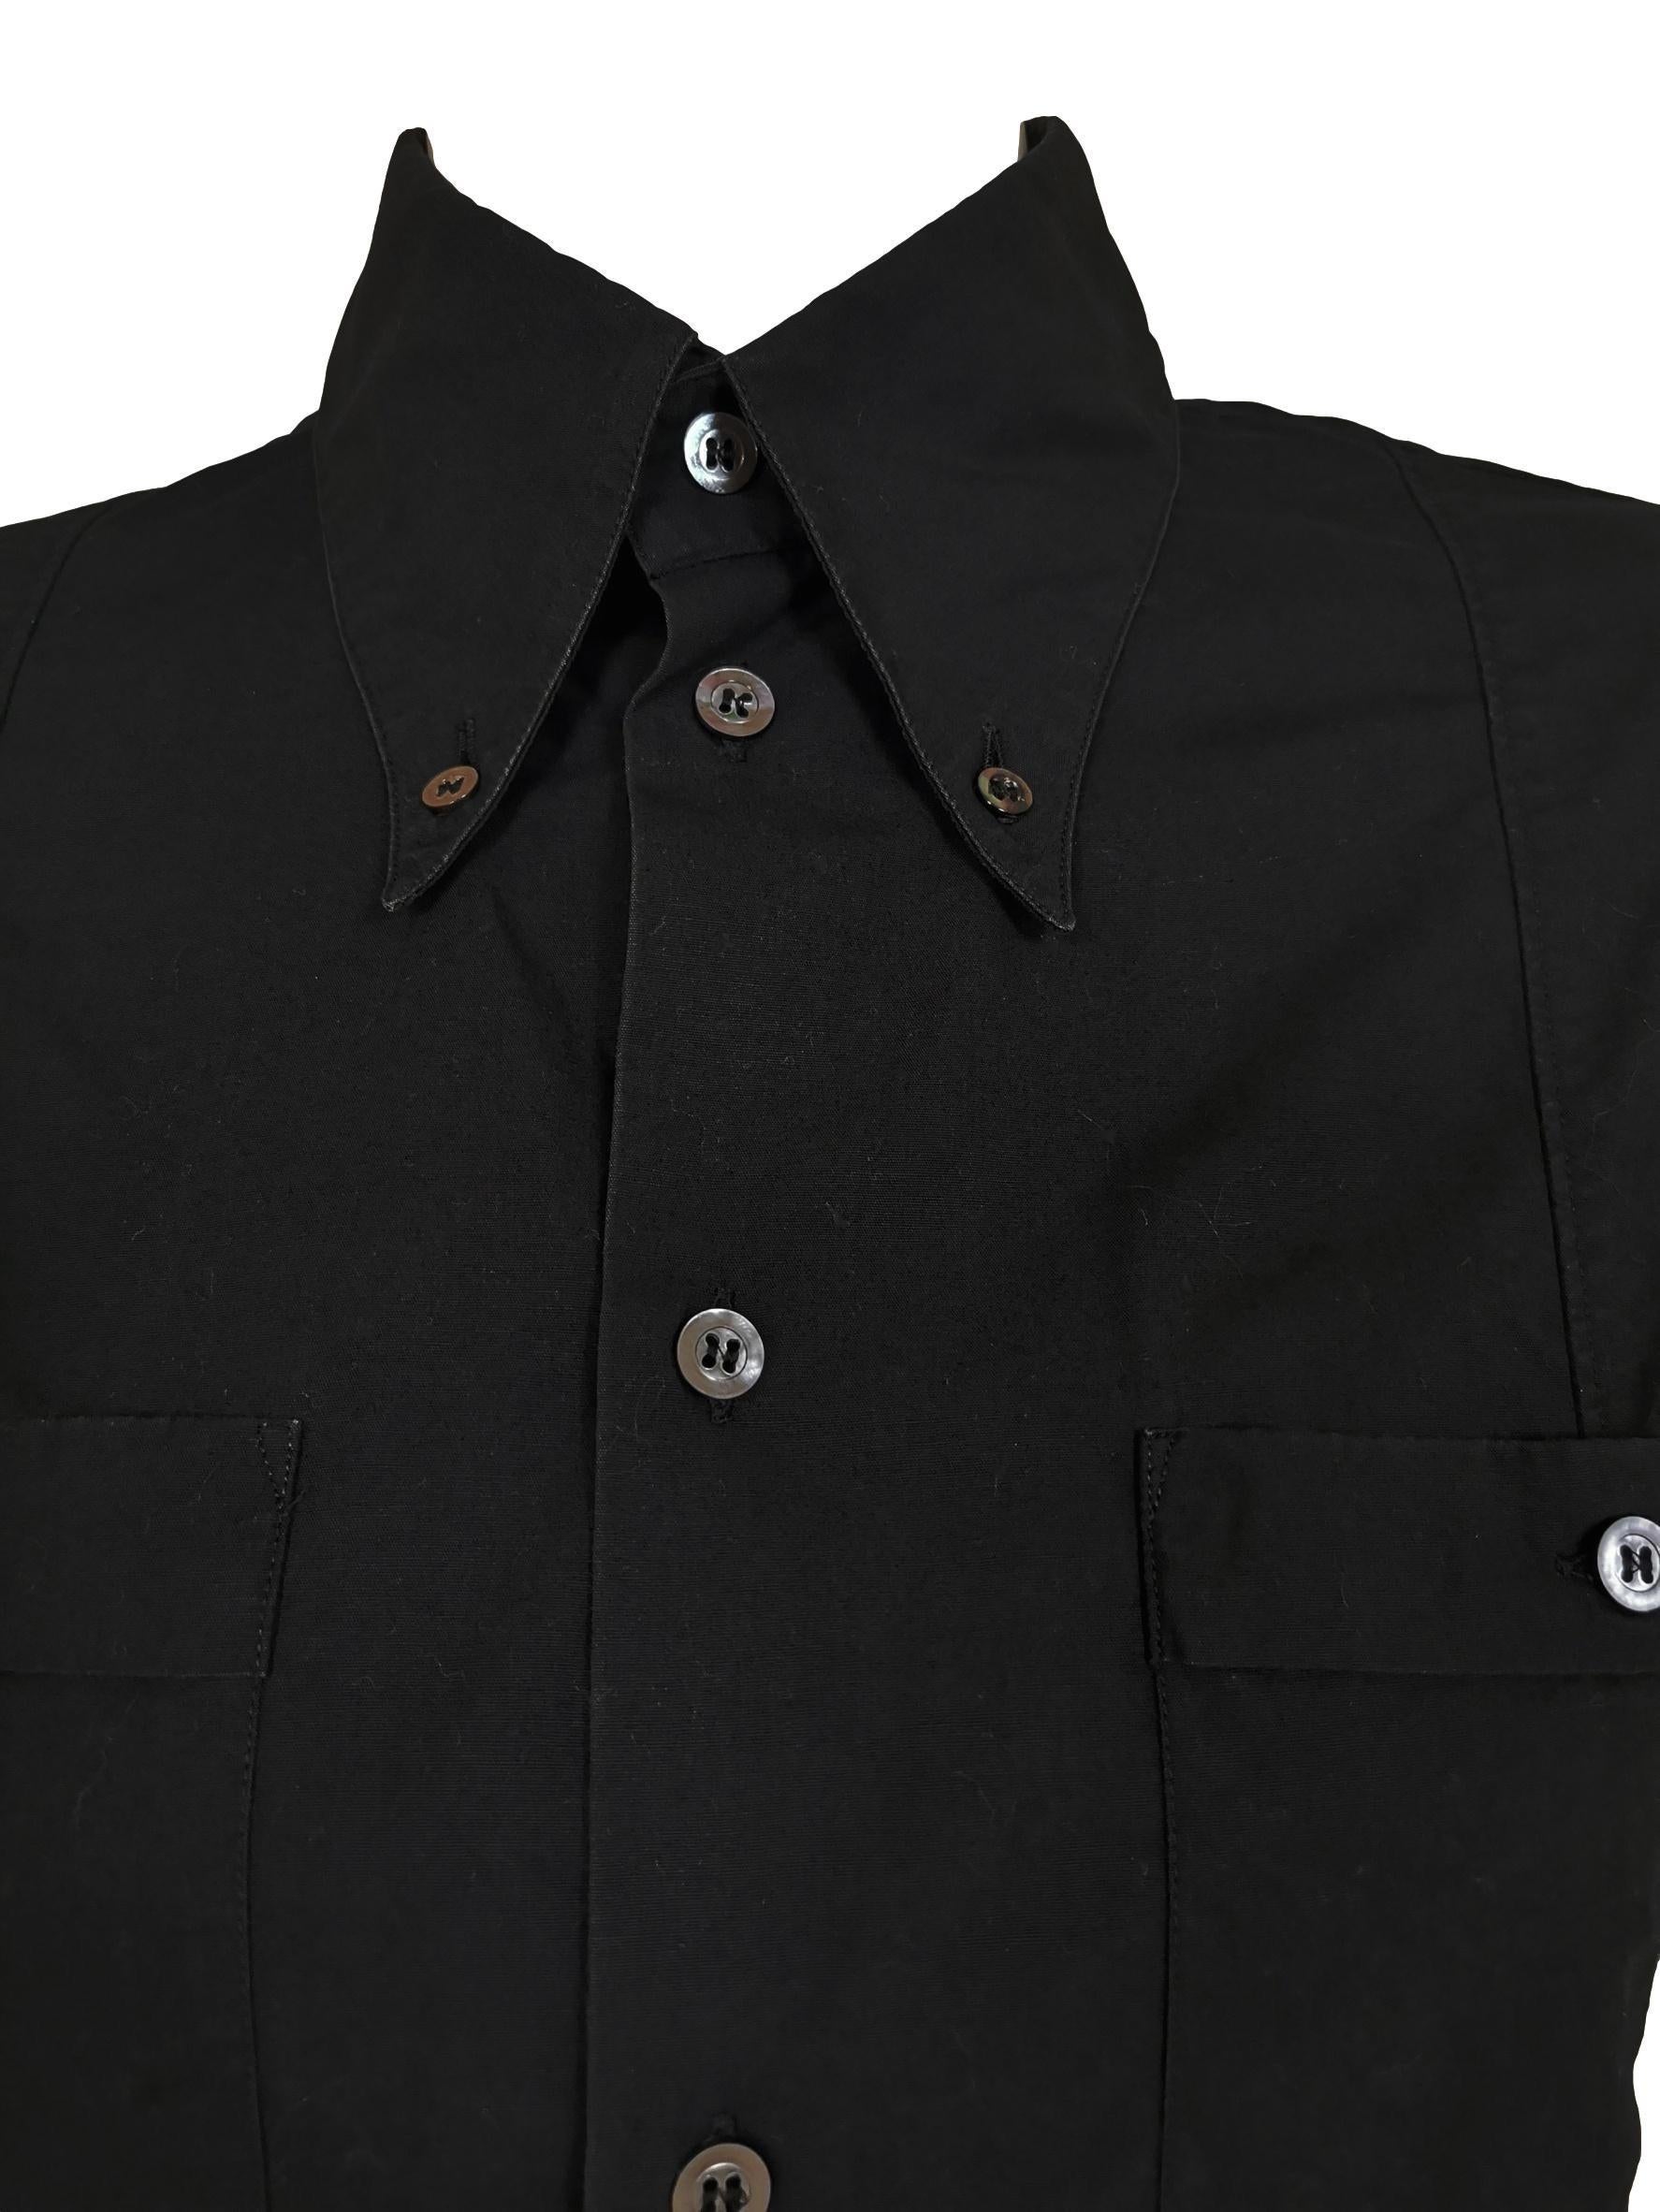 Black Alexander McQueen Logo Ivy Embroidered Shirt 1995 For Sale